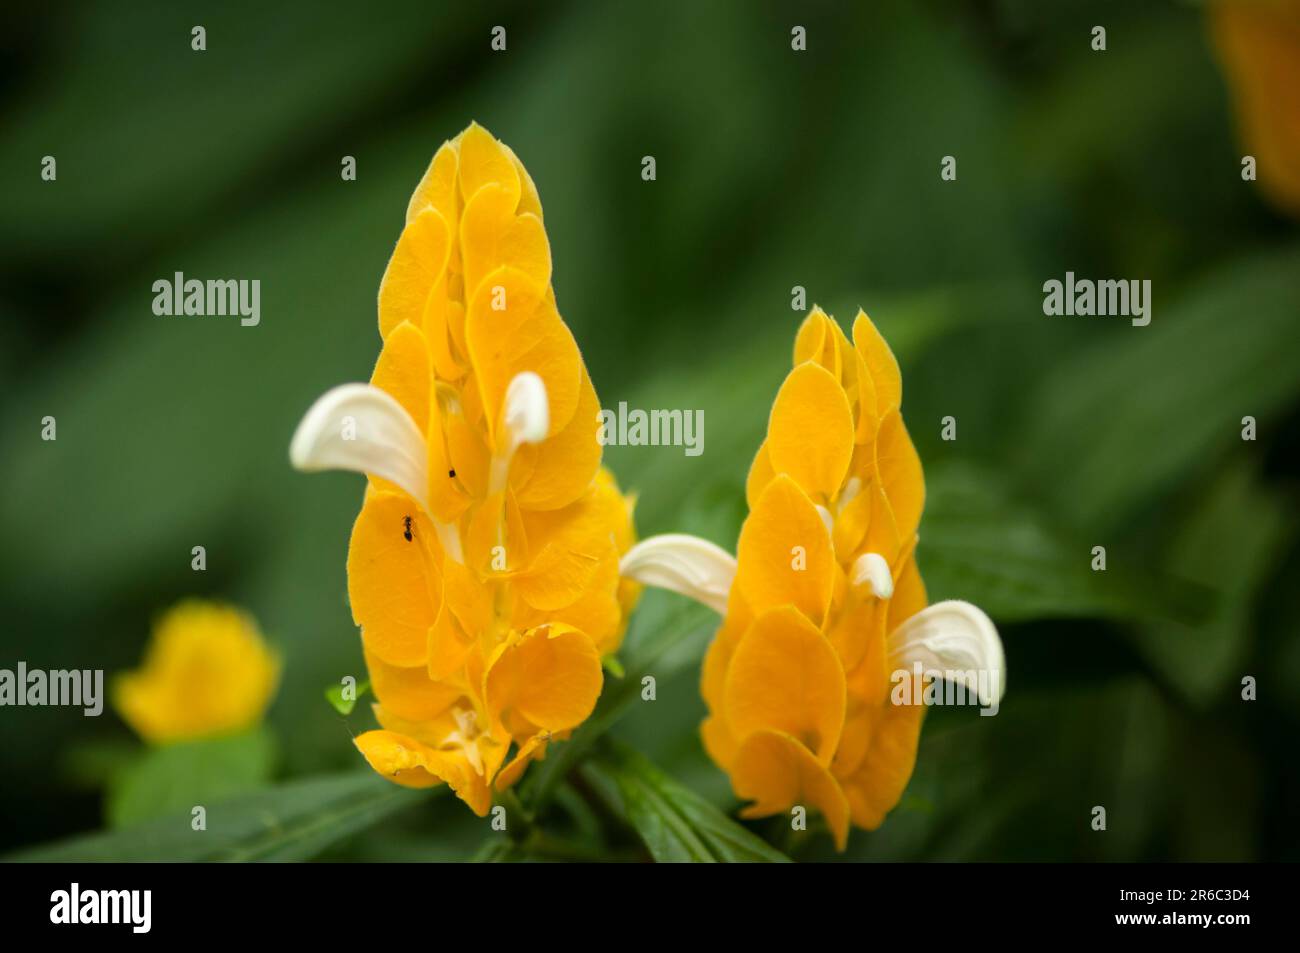 Close-up of the flowers of an ear of gold (lat. Pachystachys lutea) with a small ant against a blurred dark green natural background. Stock Photo